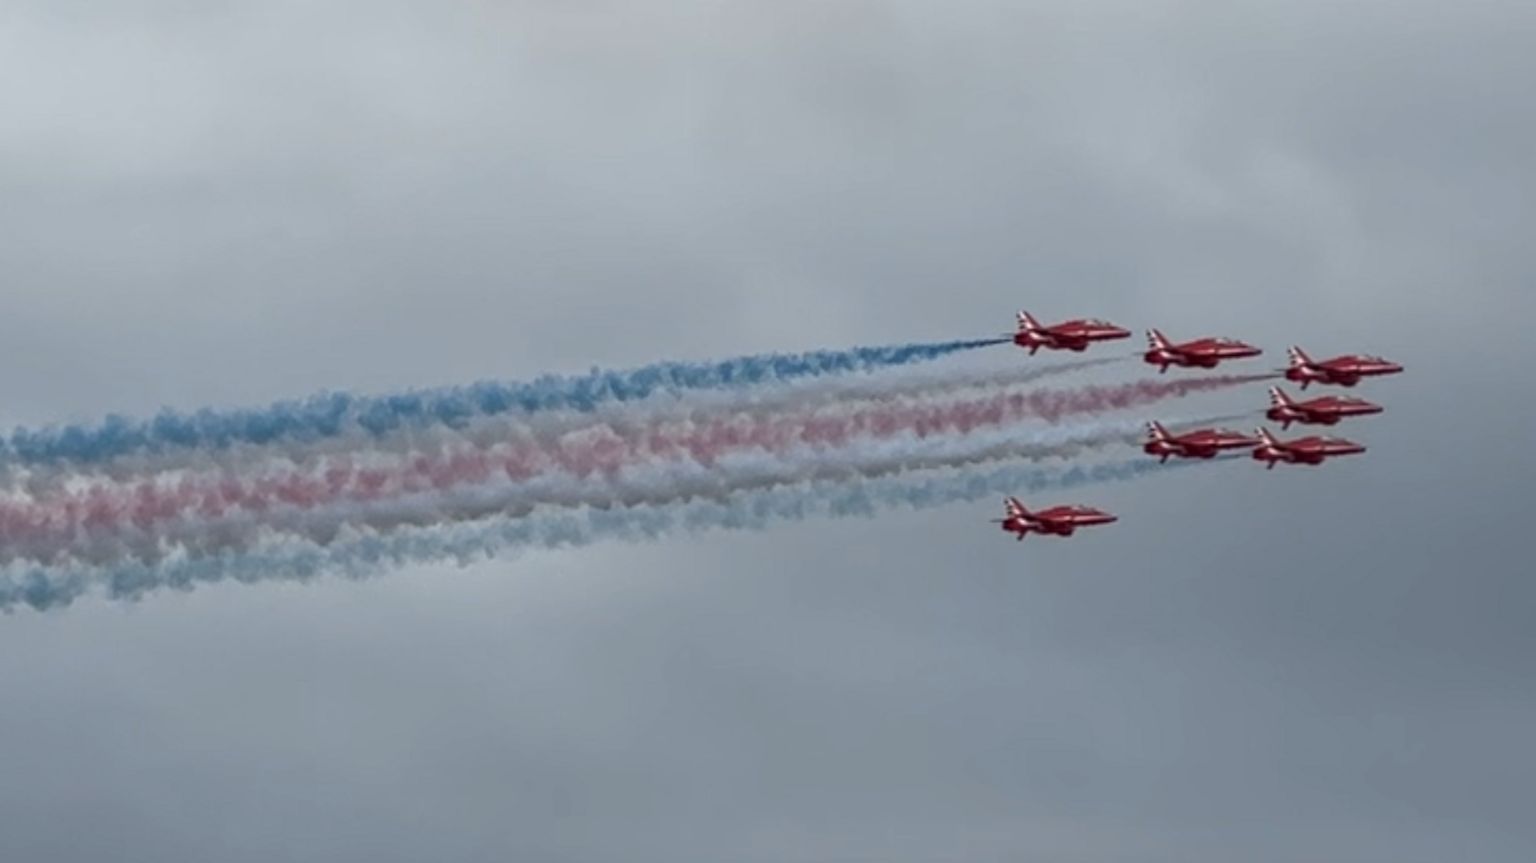 The Red Arrows in formation with blue and red smoke coming from their tails